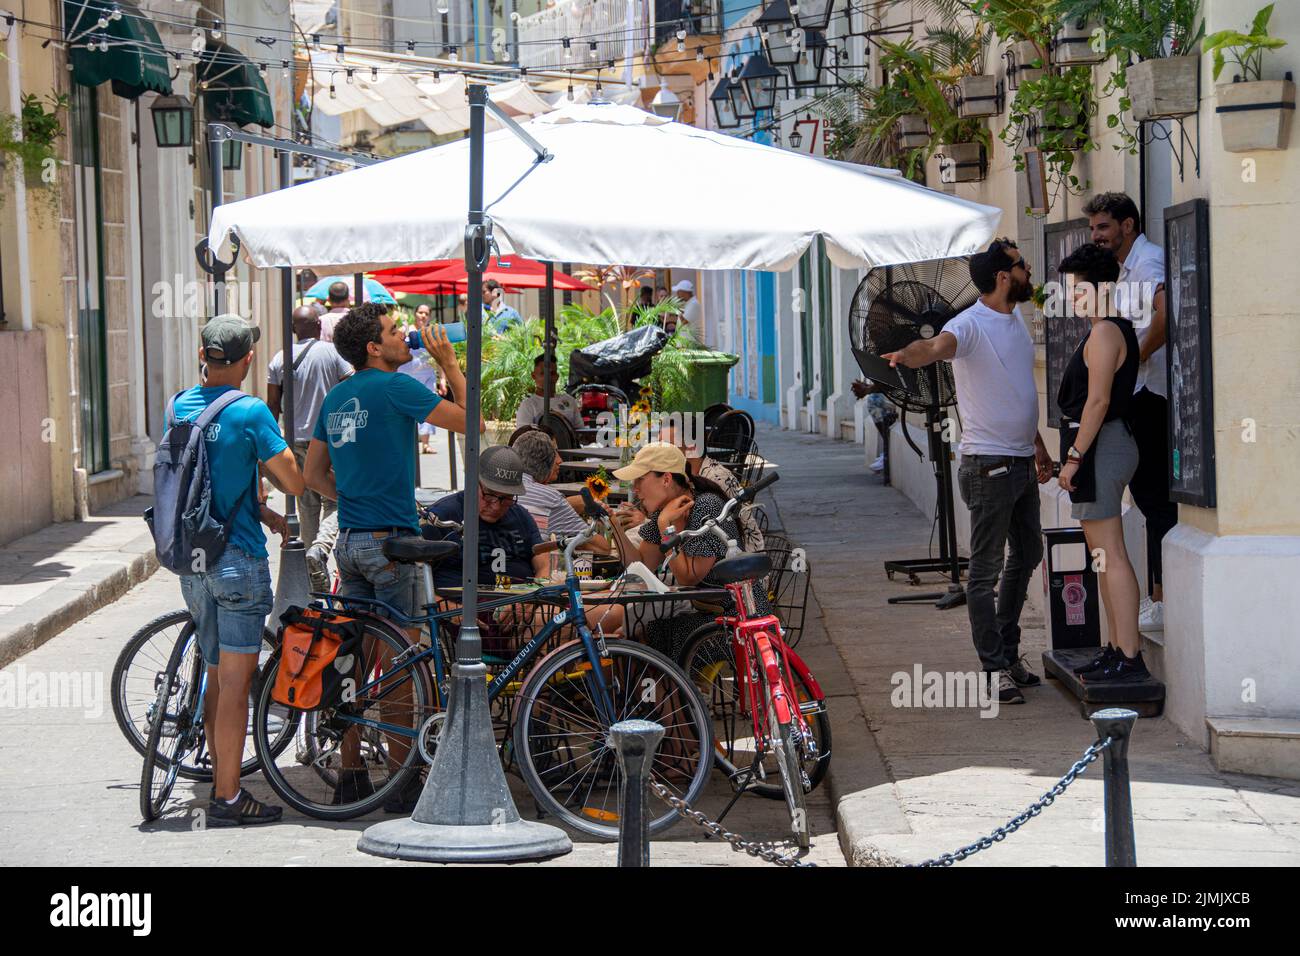 A mixed group of locals and tourists eat and mingle at an outdoor cafe, Havana, Cuba, Stock Photo